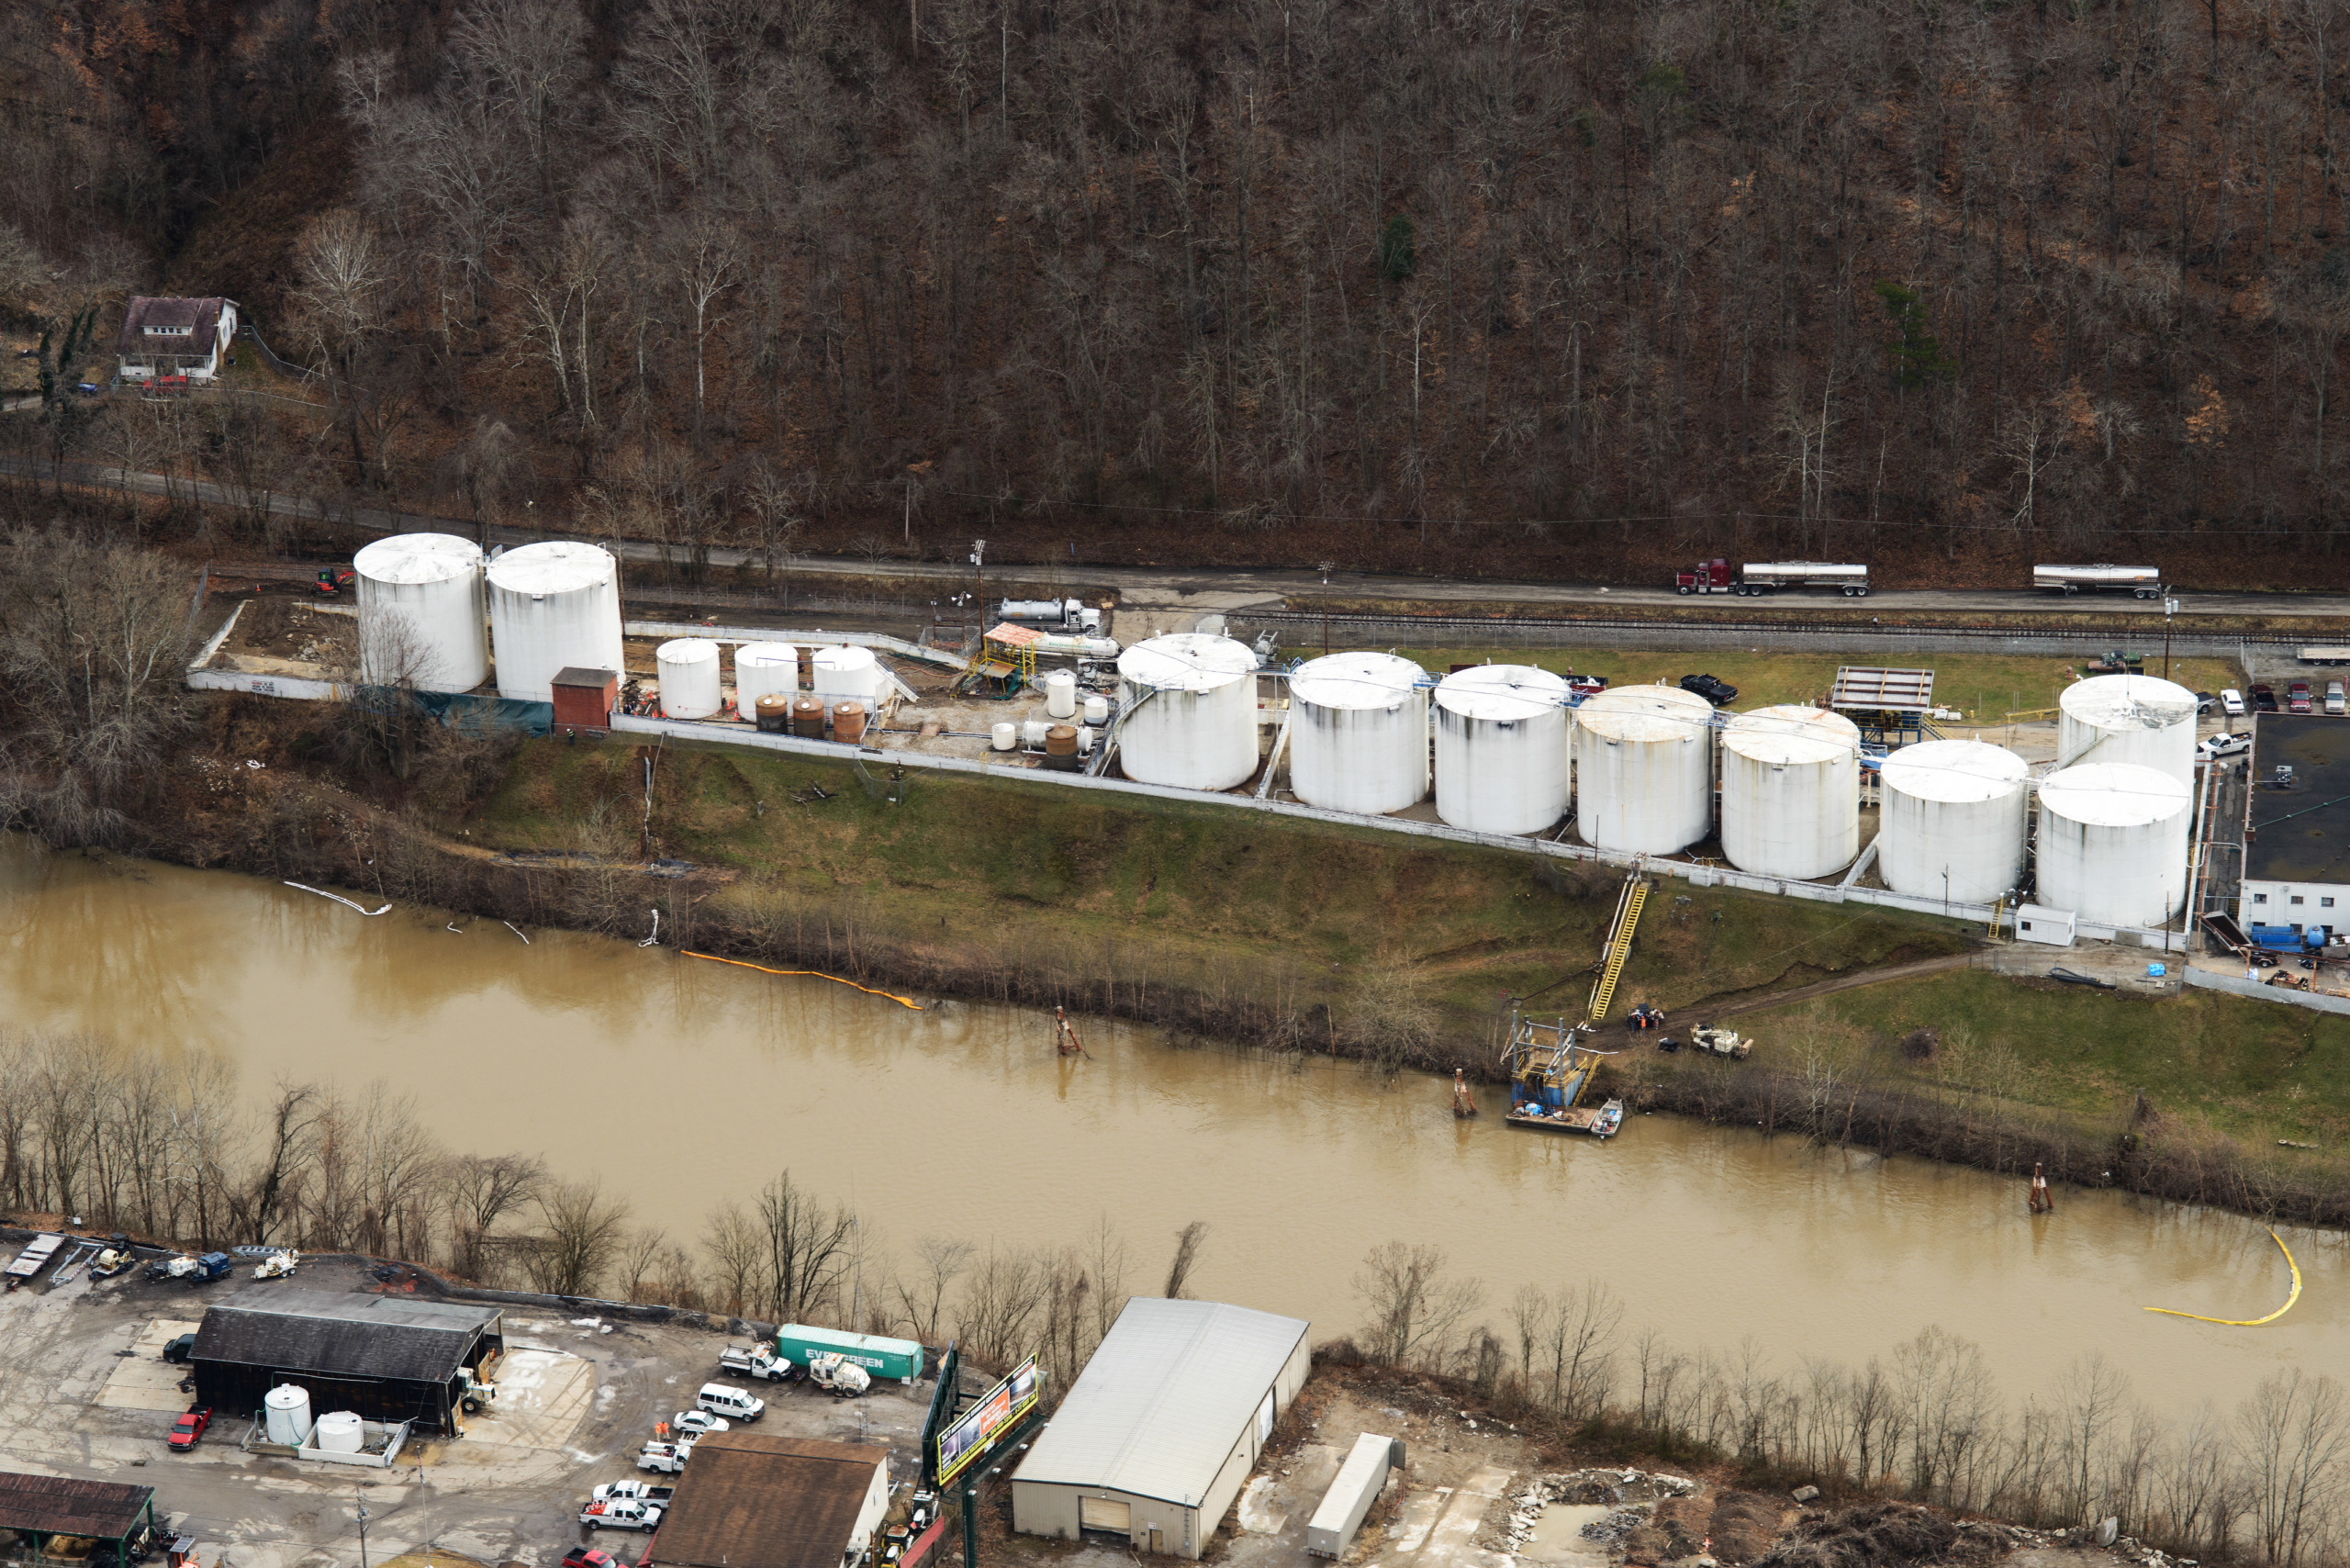 The Freedom Industries plant in West Virginia, site of a major 2014 chemical spill into the Elk River